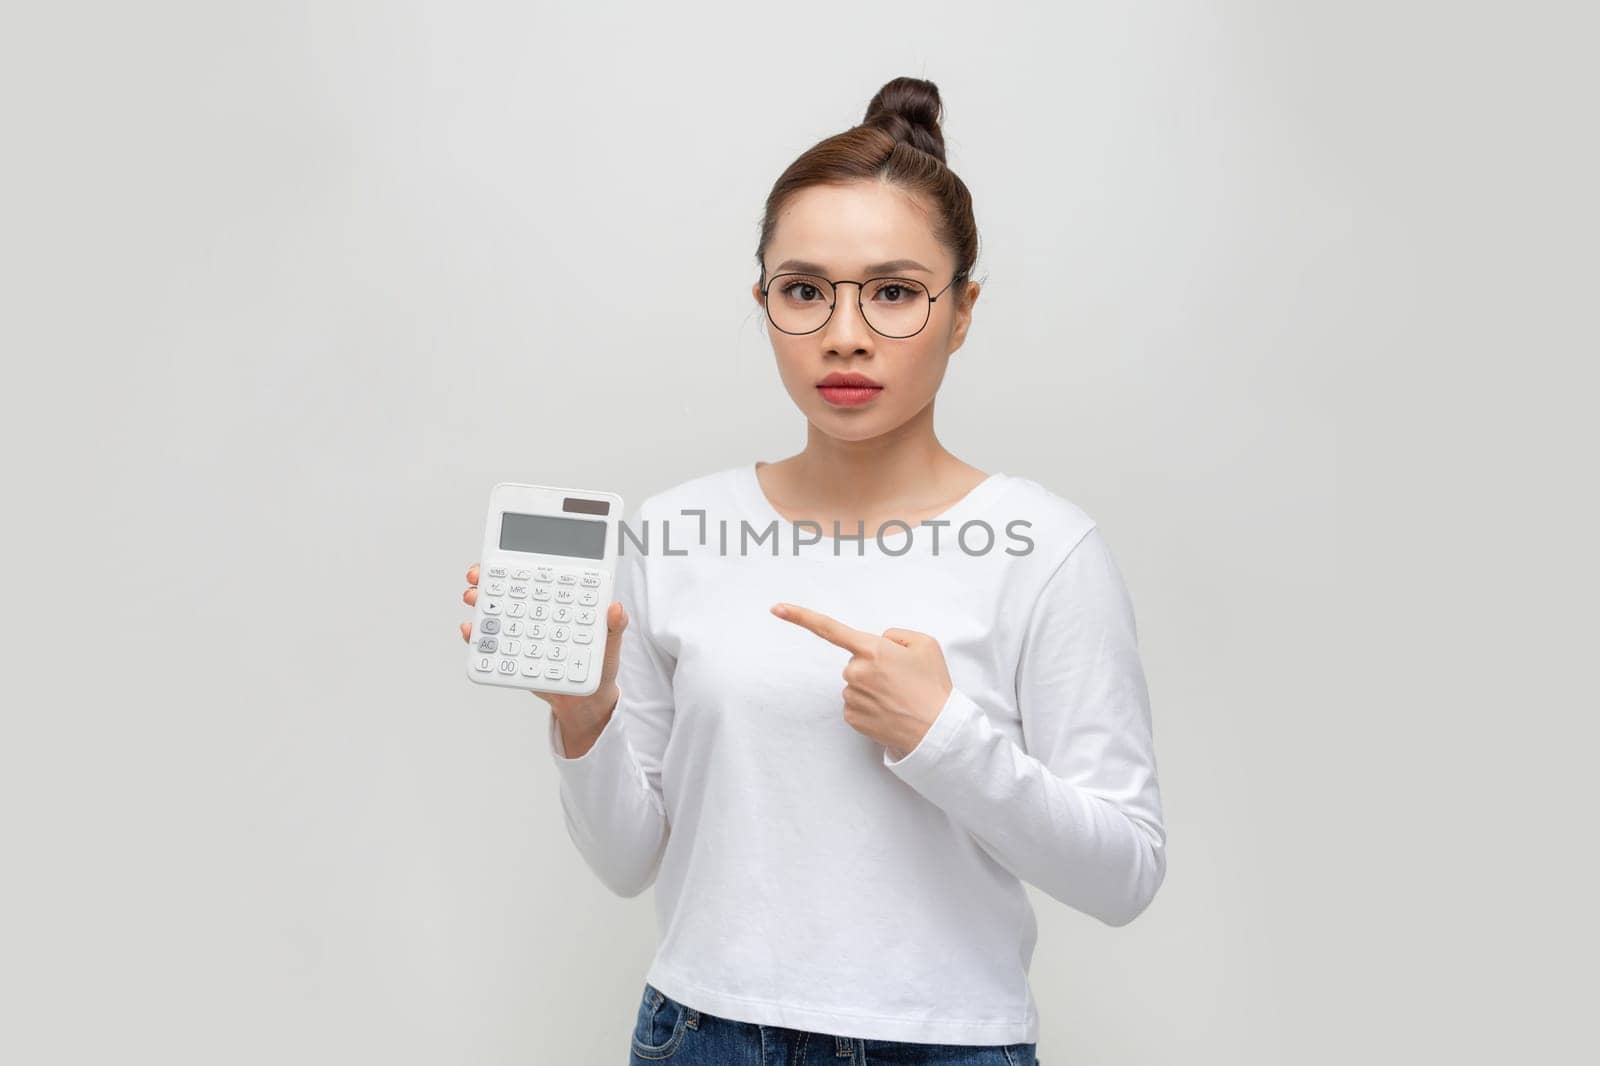 Tax day concept. Woman confident smiling holding calculator and finger point device,